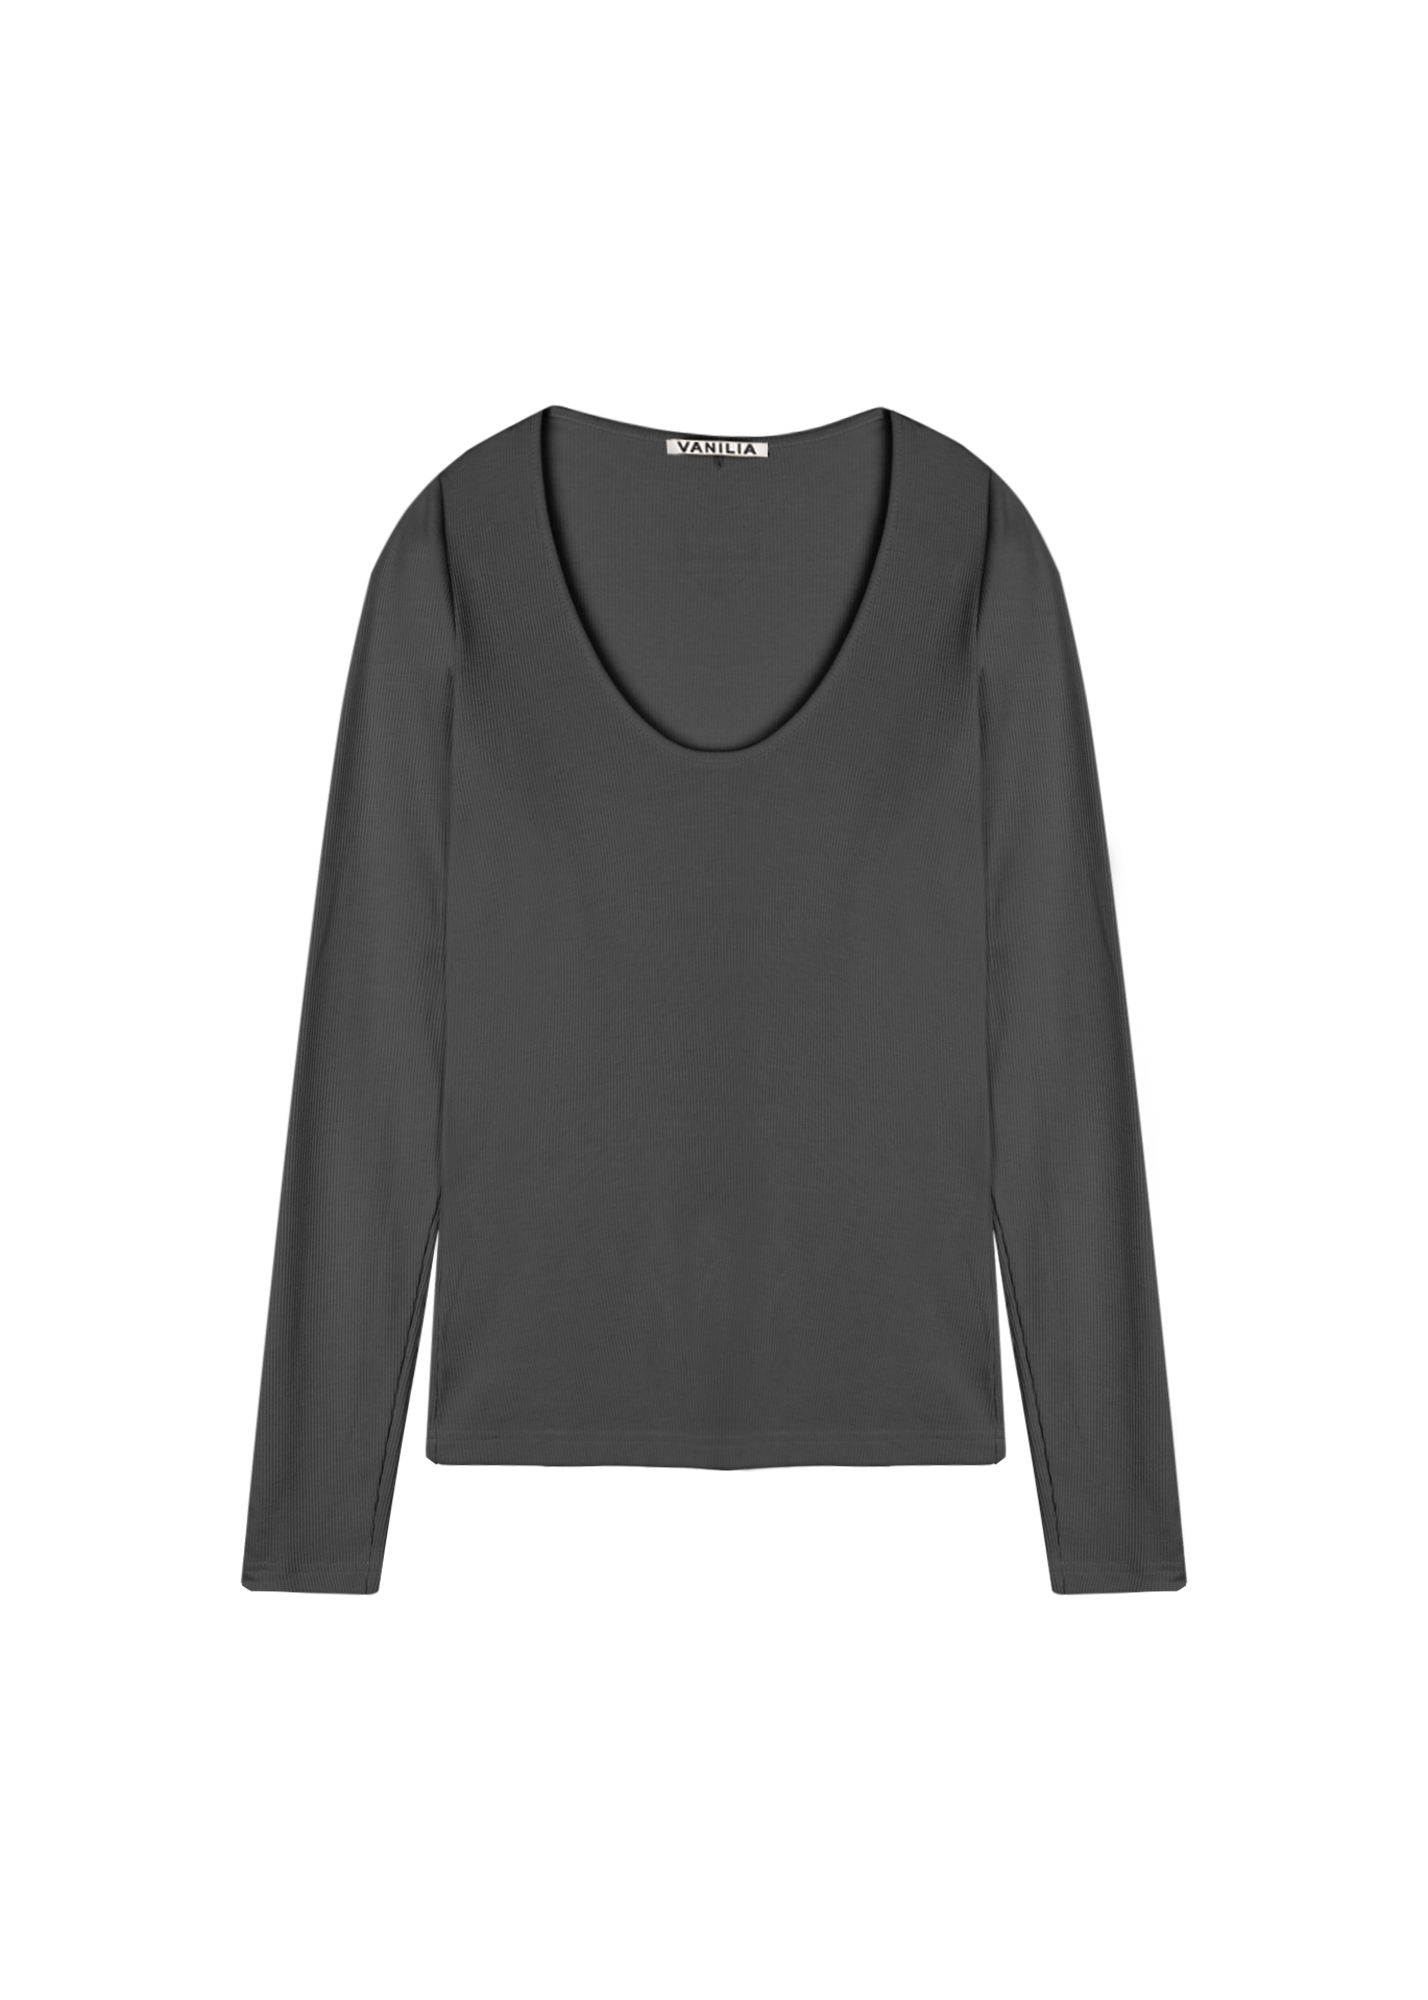 Fitted jersey top with round neckline